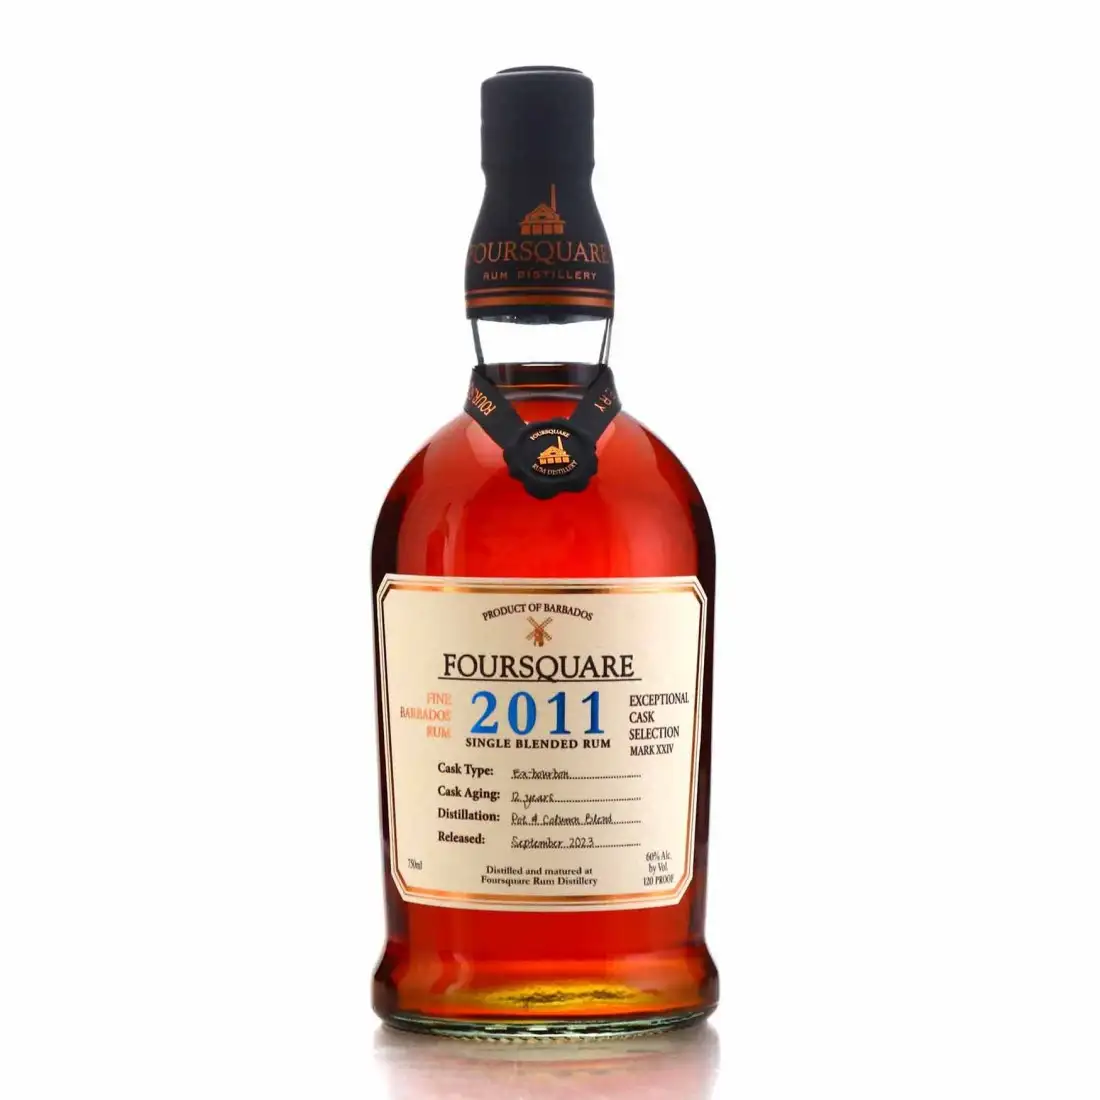 Image of the front of the bottle of the rum Exceptional Cask Selection XXIV